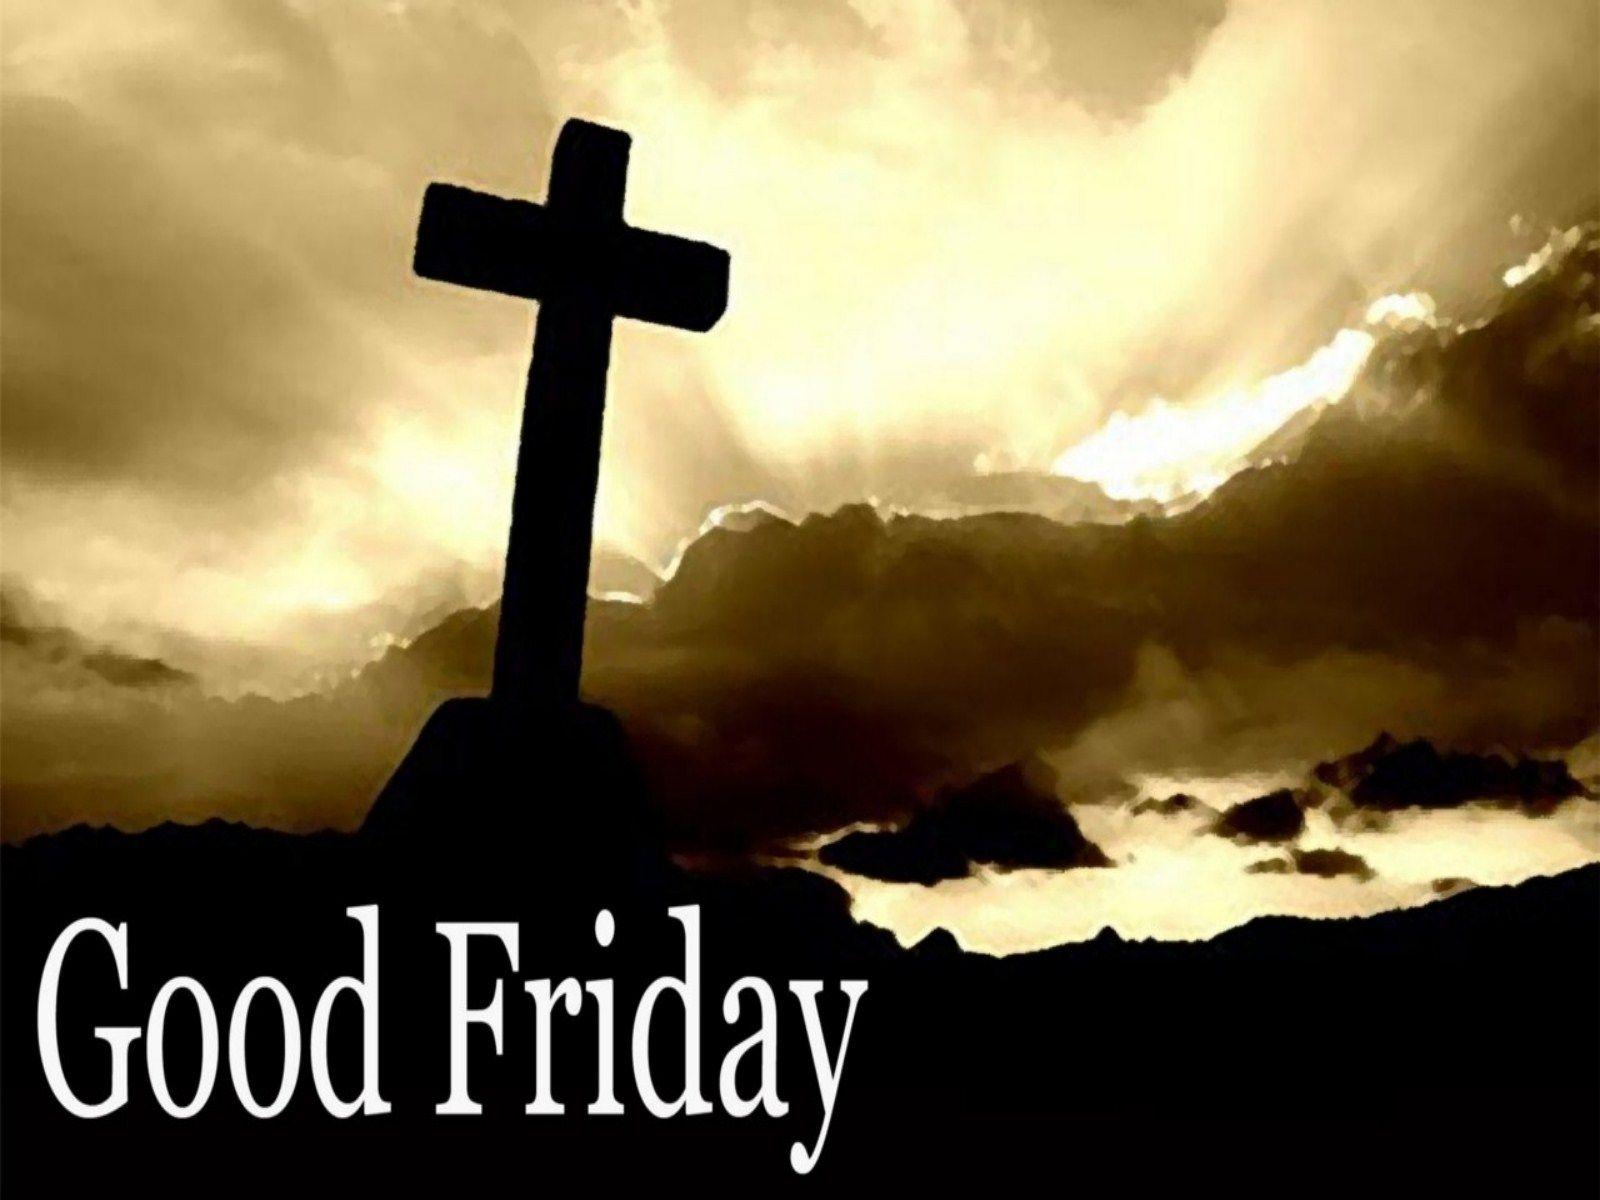 Happy Good Friday 2018 Image & Quotes